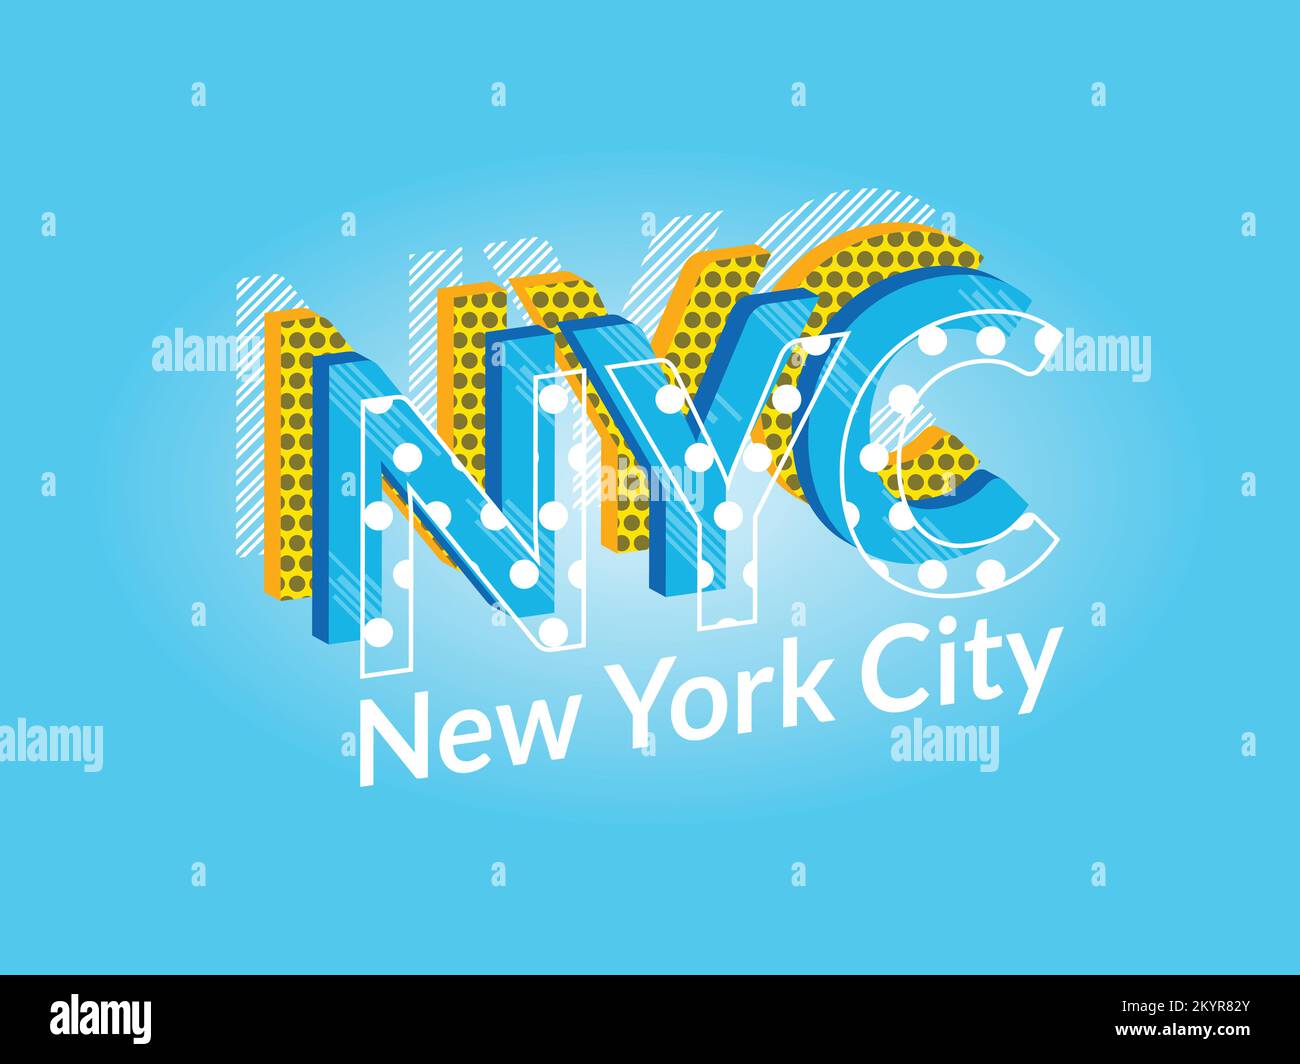 New york city Stock Vector Images - Alamy